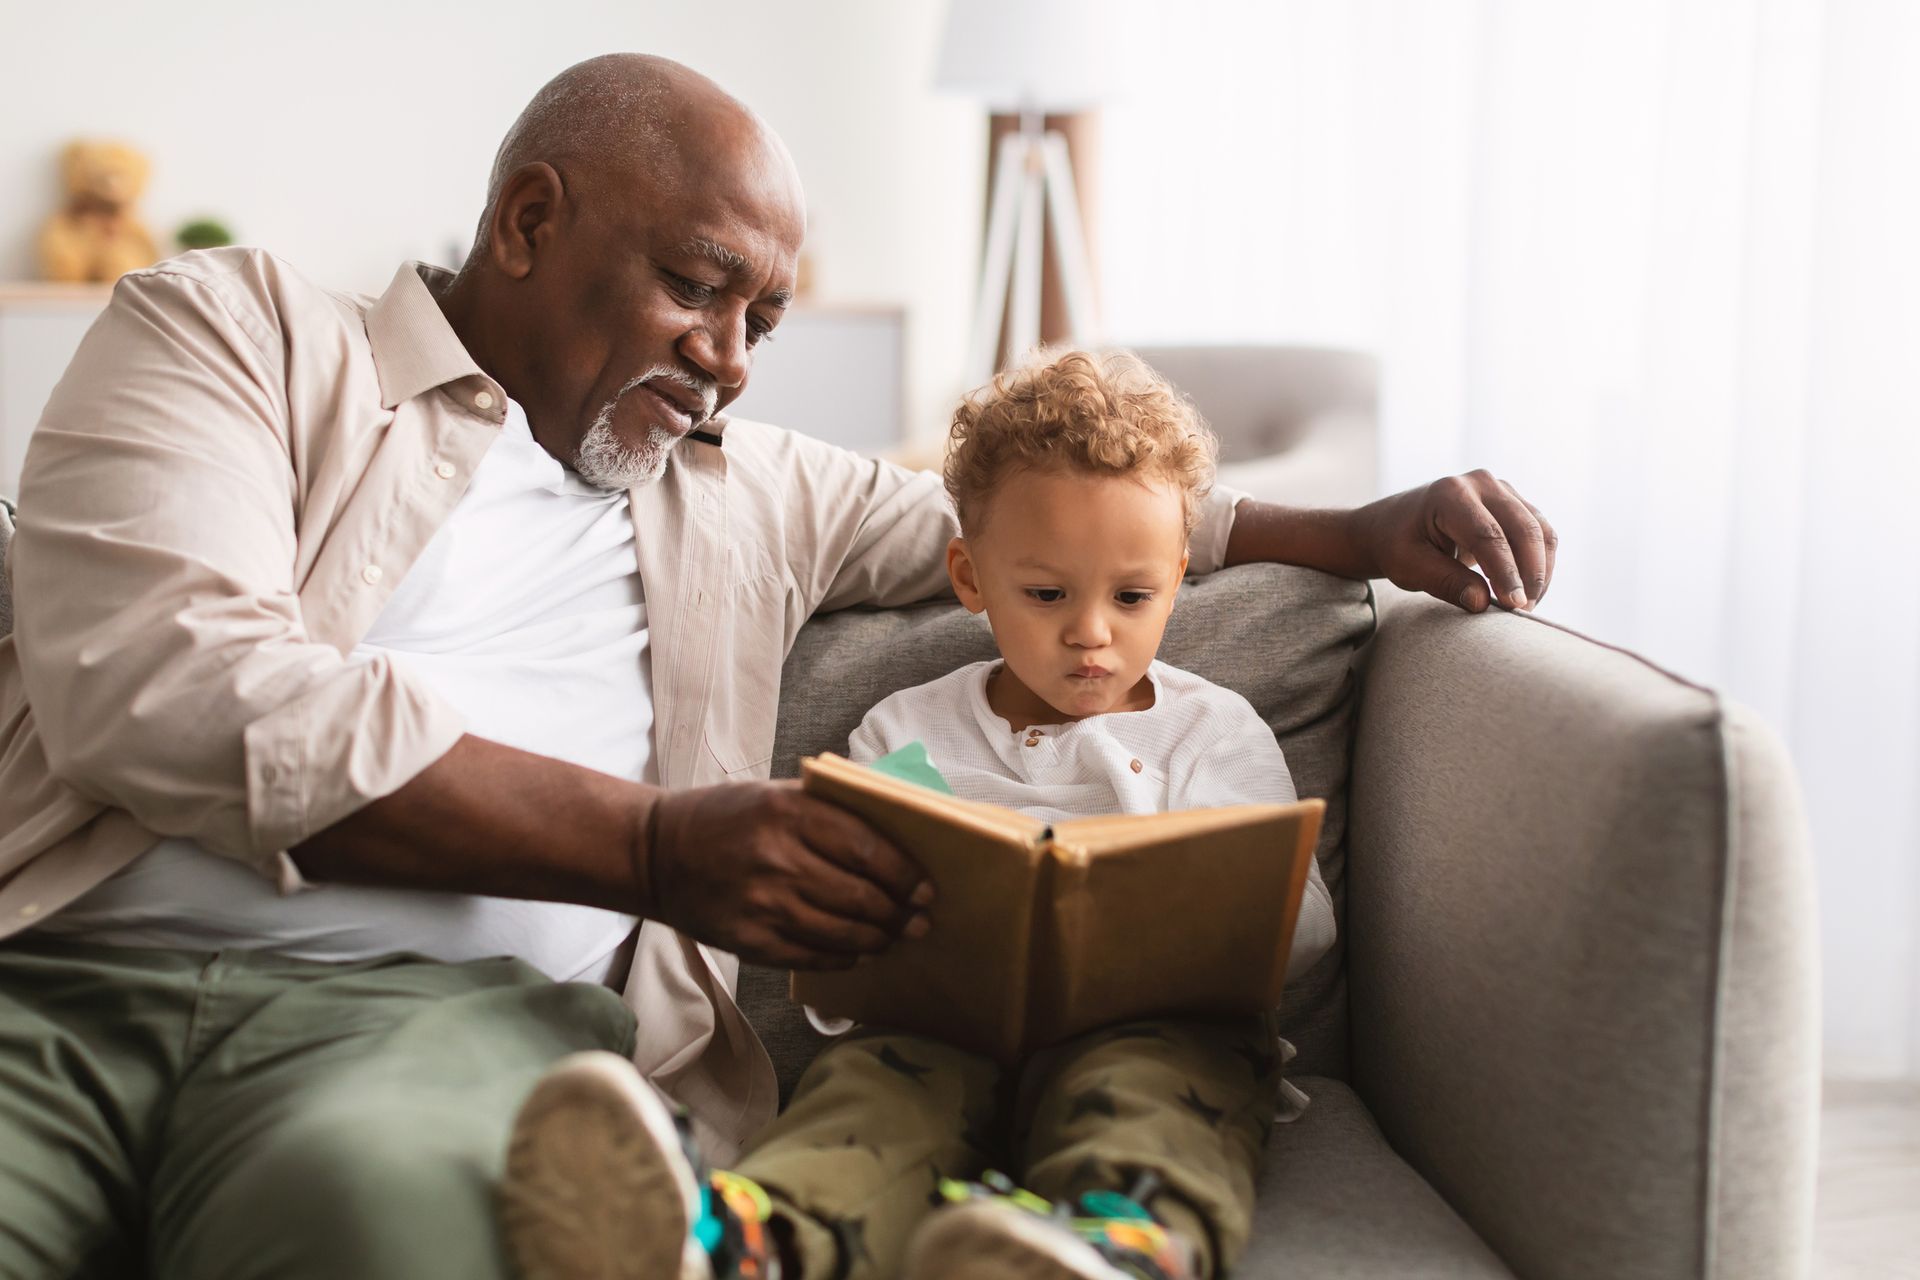 An elderly man is reading a book to a young boy while sitting on a couch.